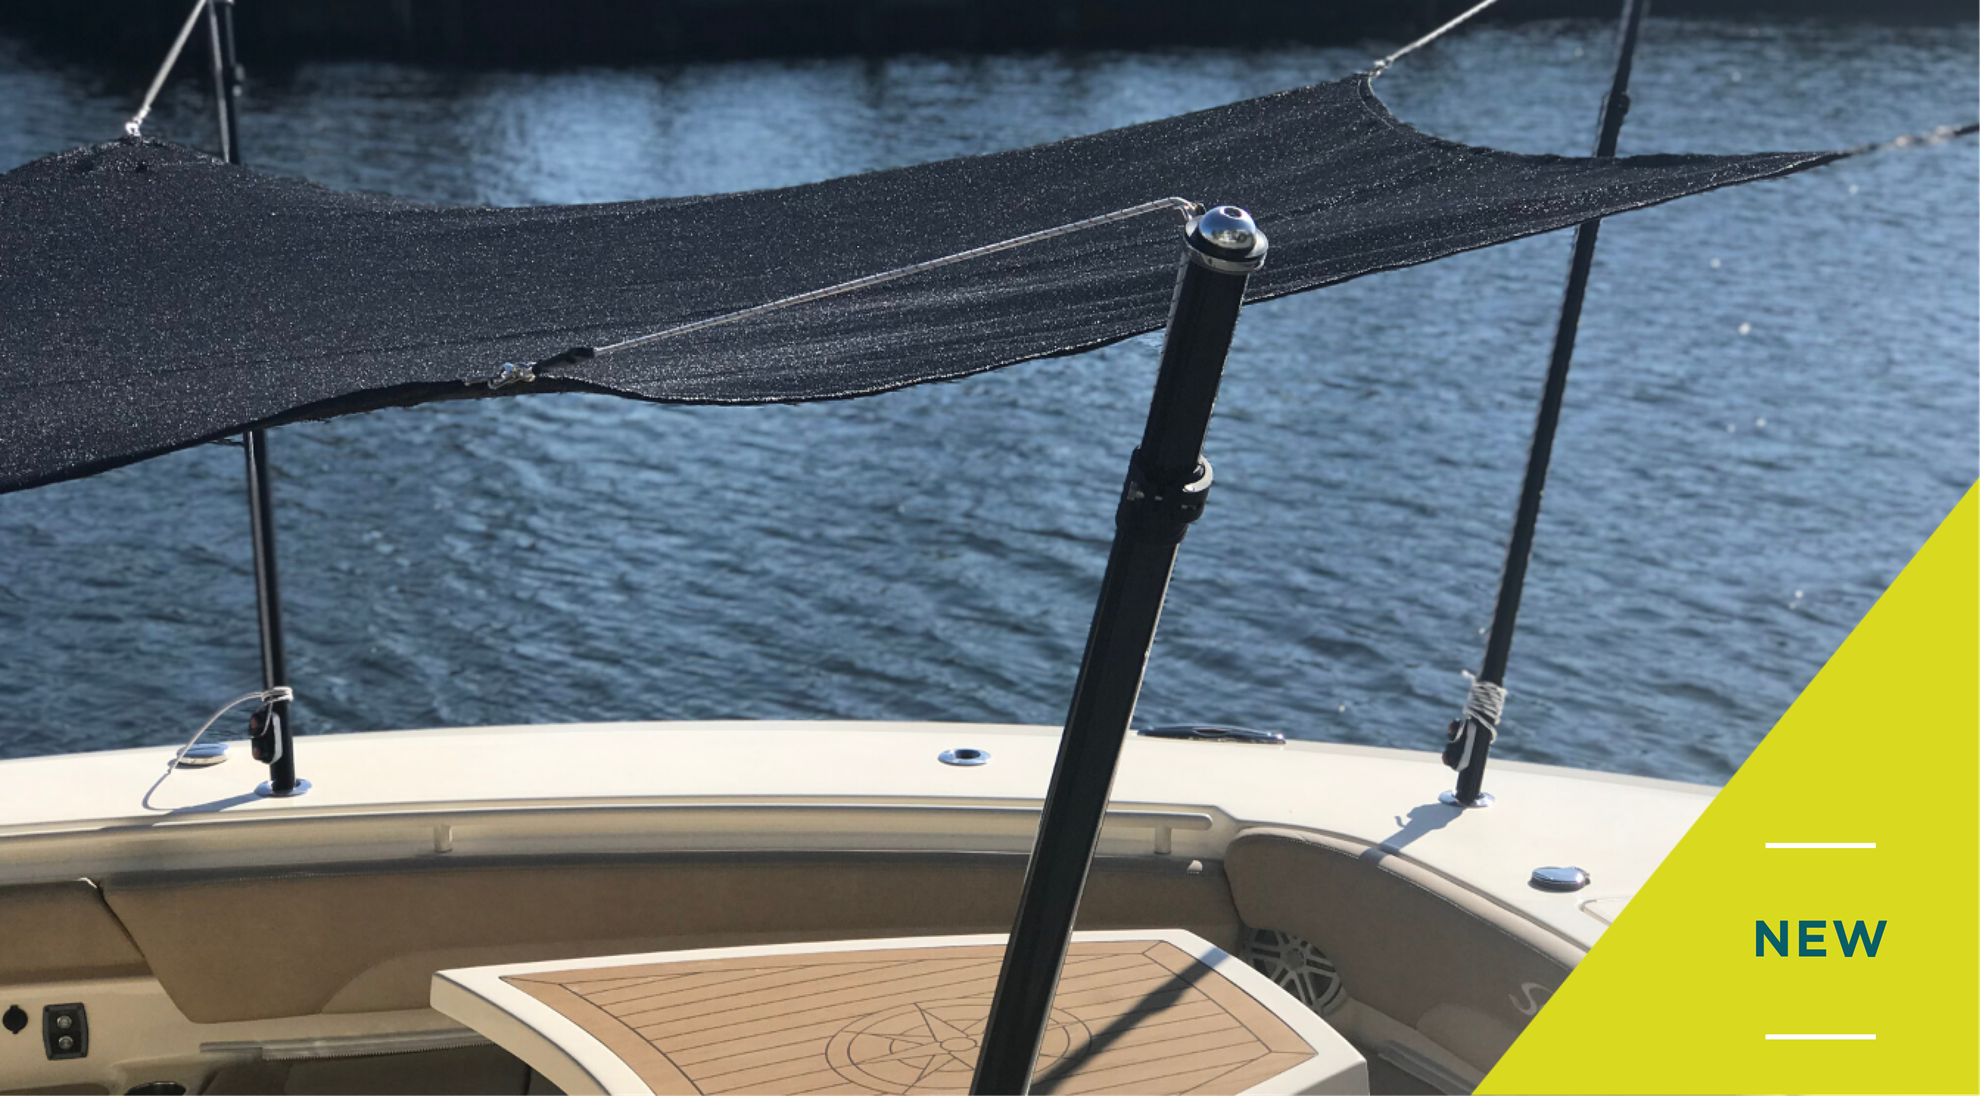 Introducing a New Shade Product from TACO Marine!